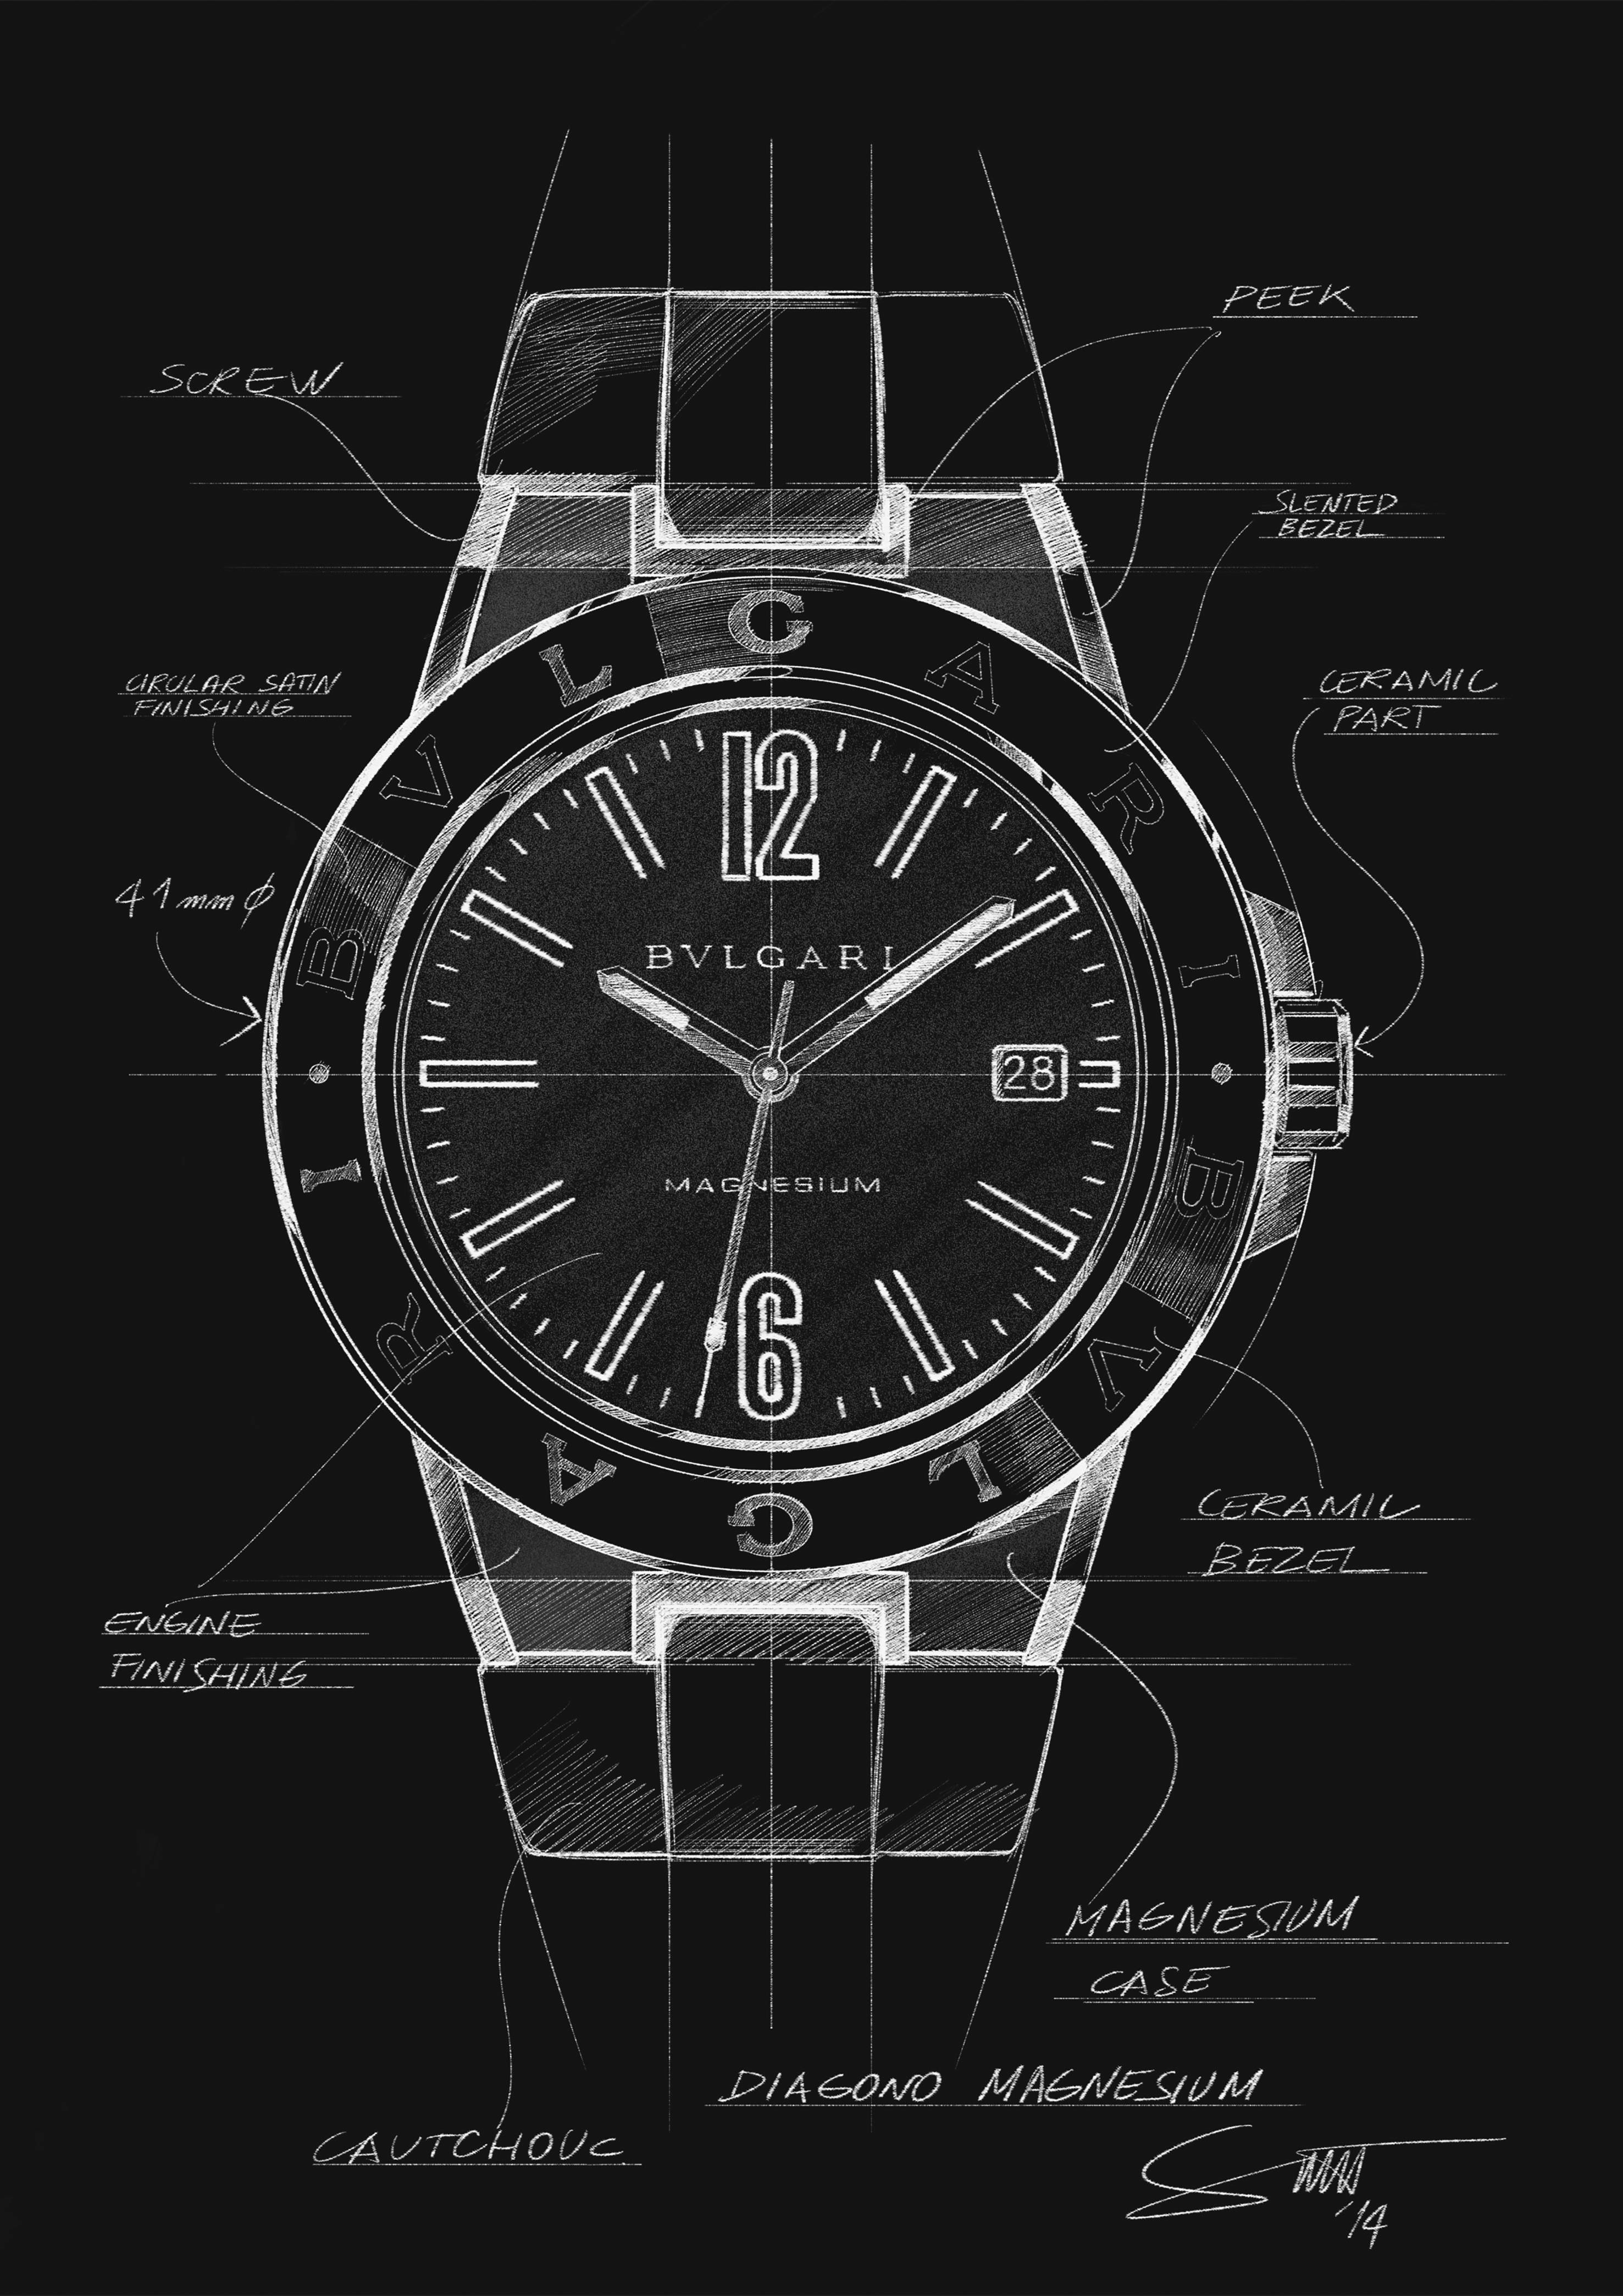 The Bulgari Diagono Magnesium Concept Watch Is Not A Smartwatch